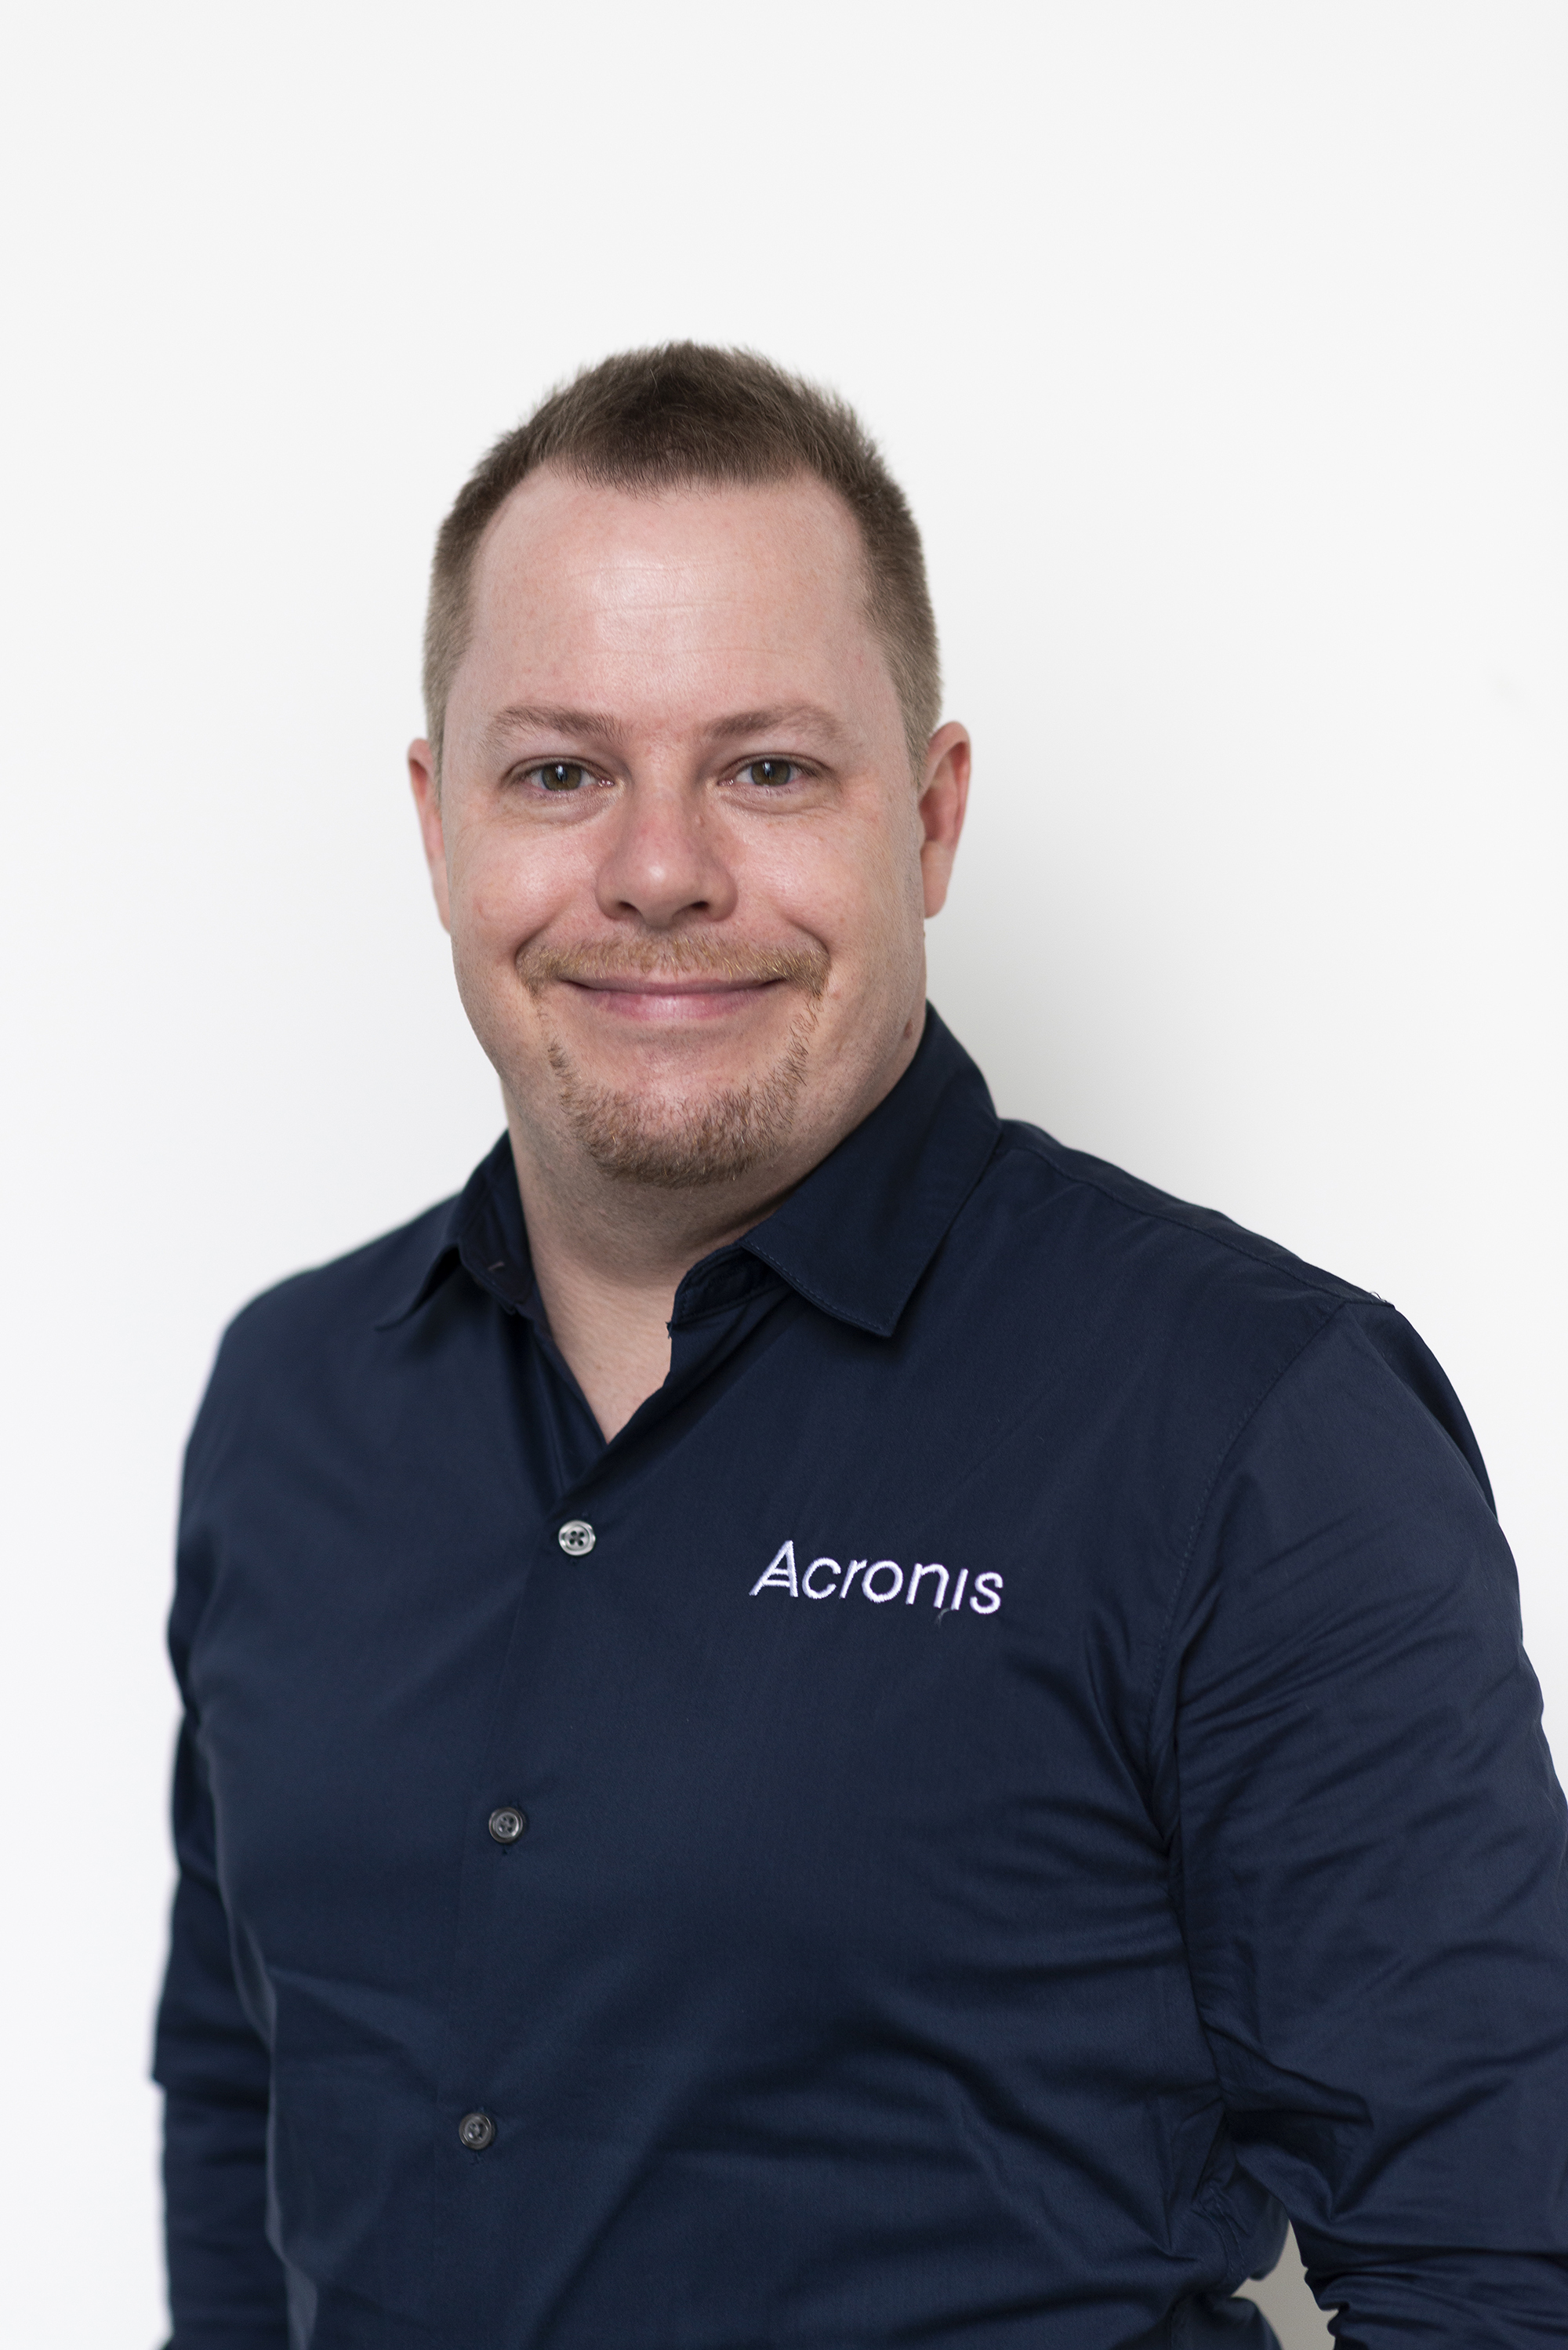 Acronis Simplifies Endpoint Security with New EDR Solution